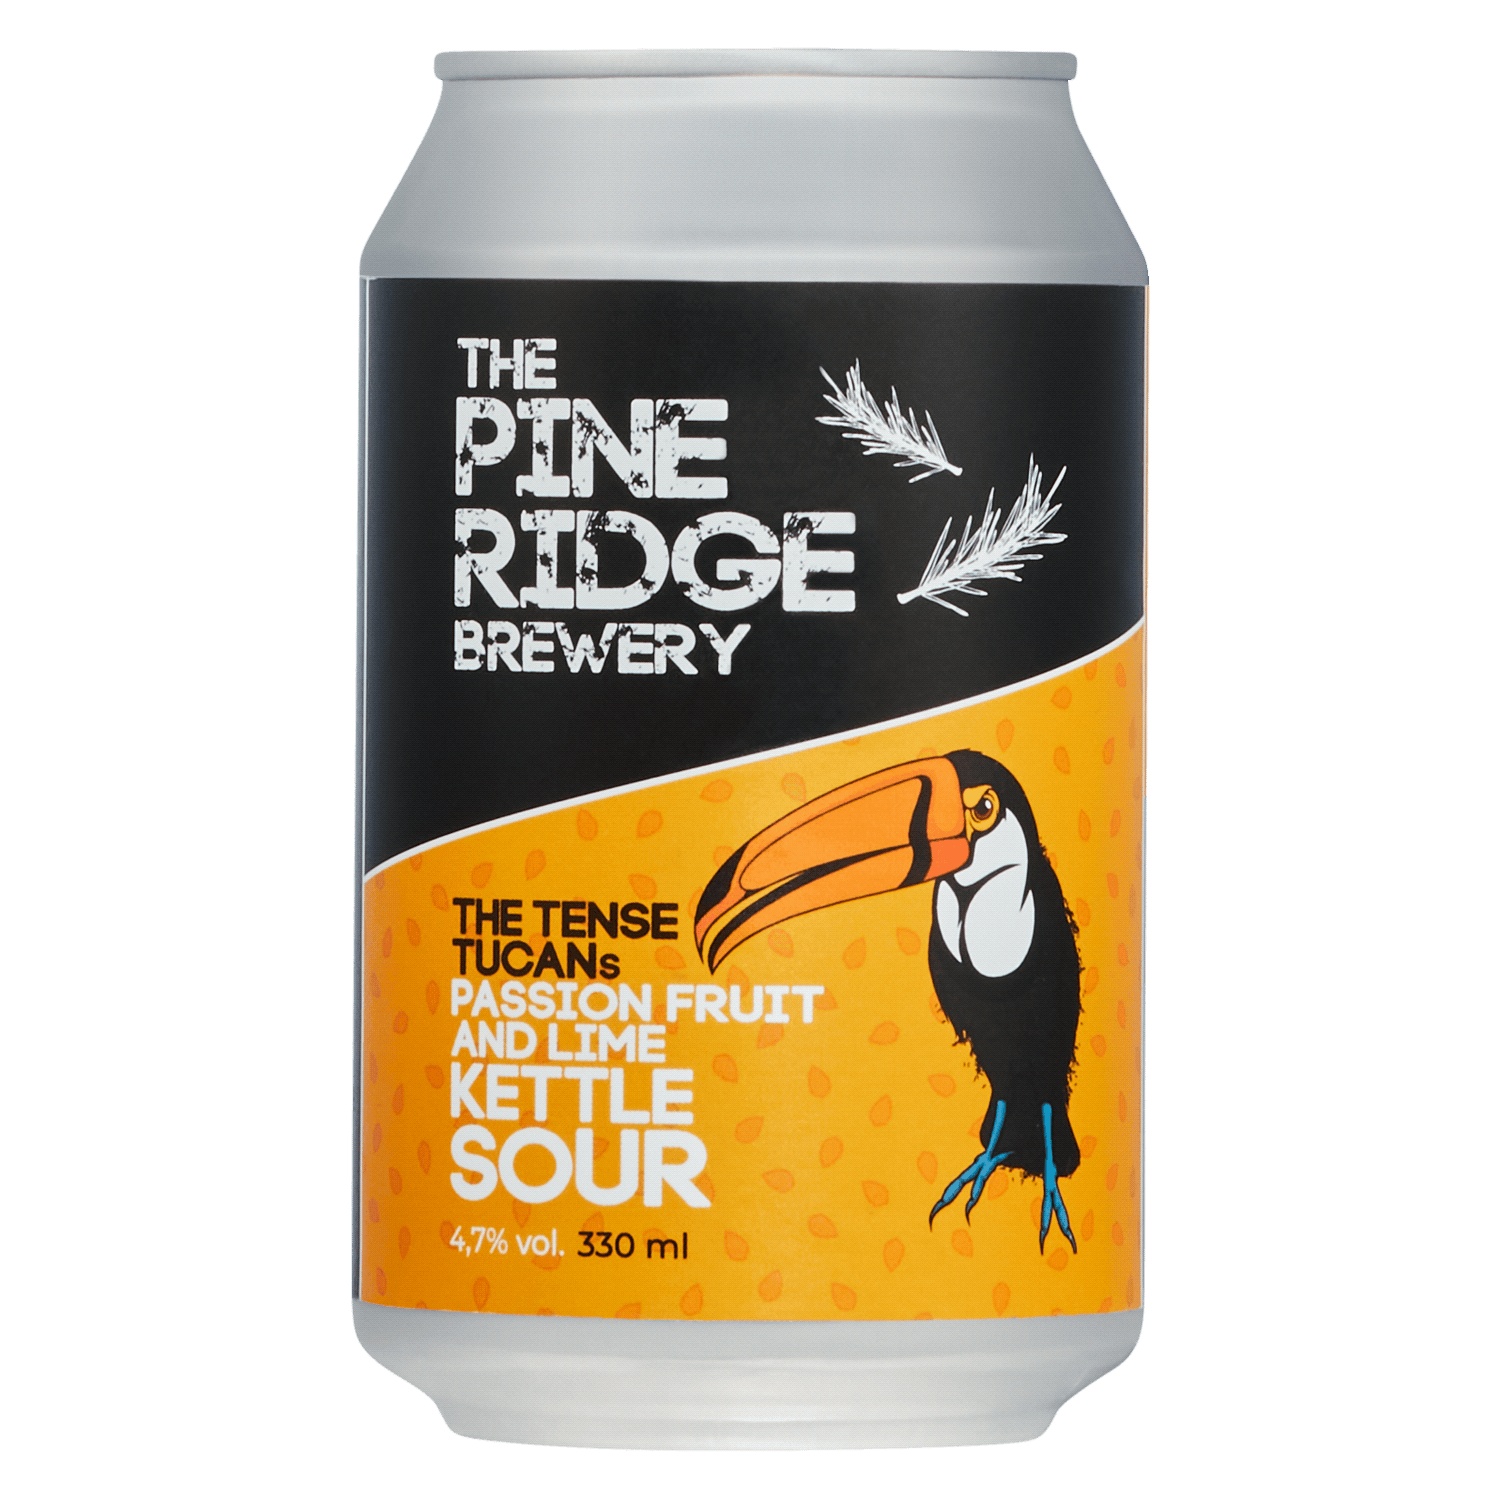 The Tense Tucans Passion Fruit and Lime Kettle Sour